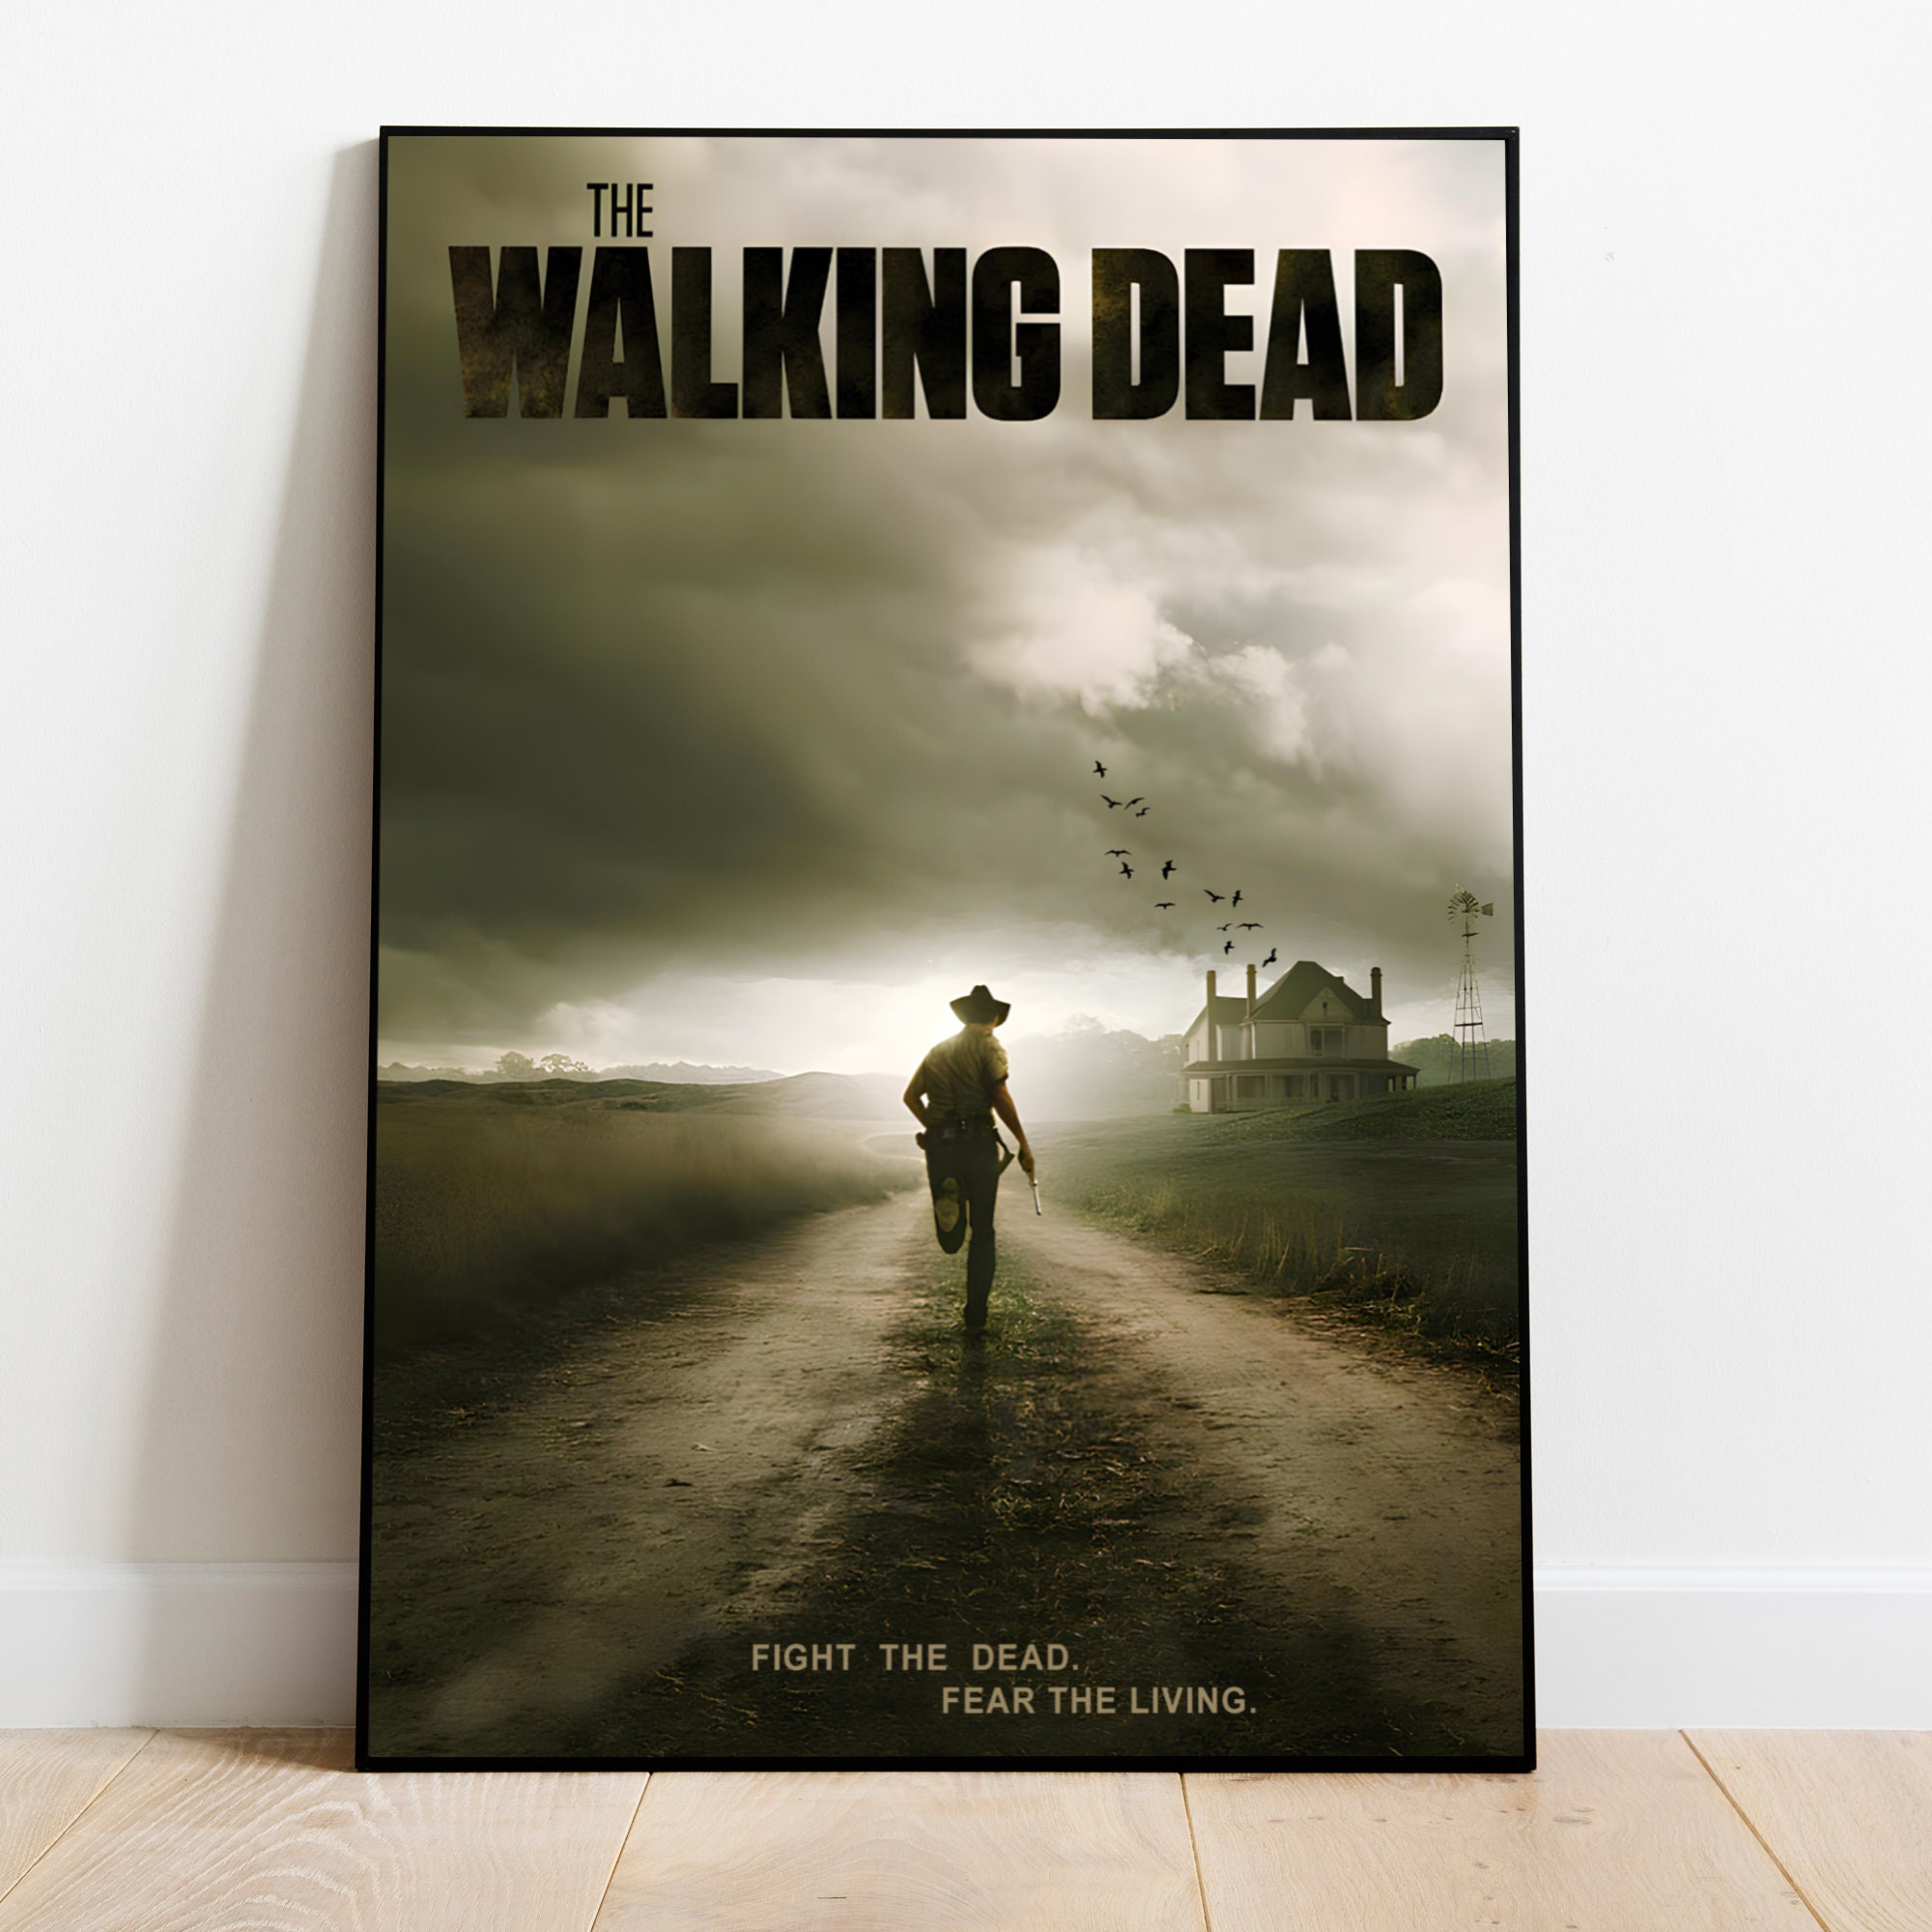 Here are the main promotional posters of every Walking Dead half